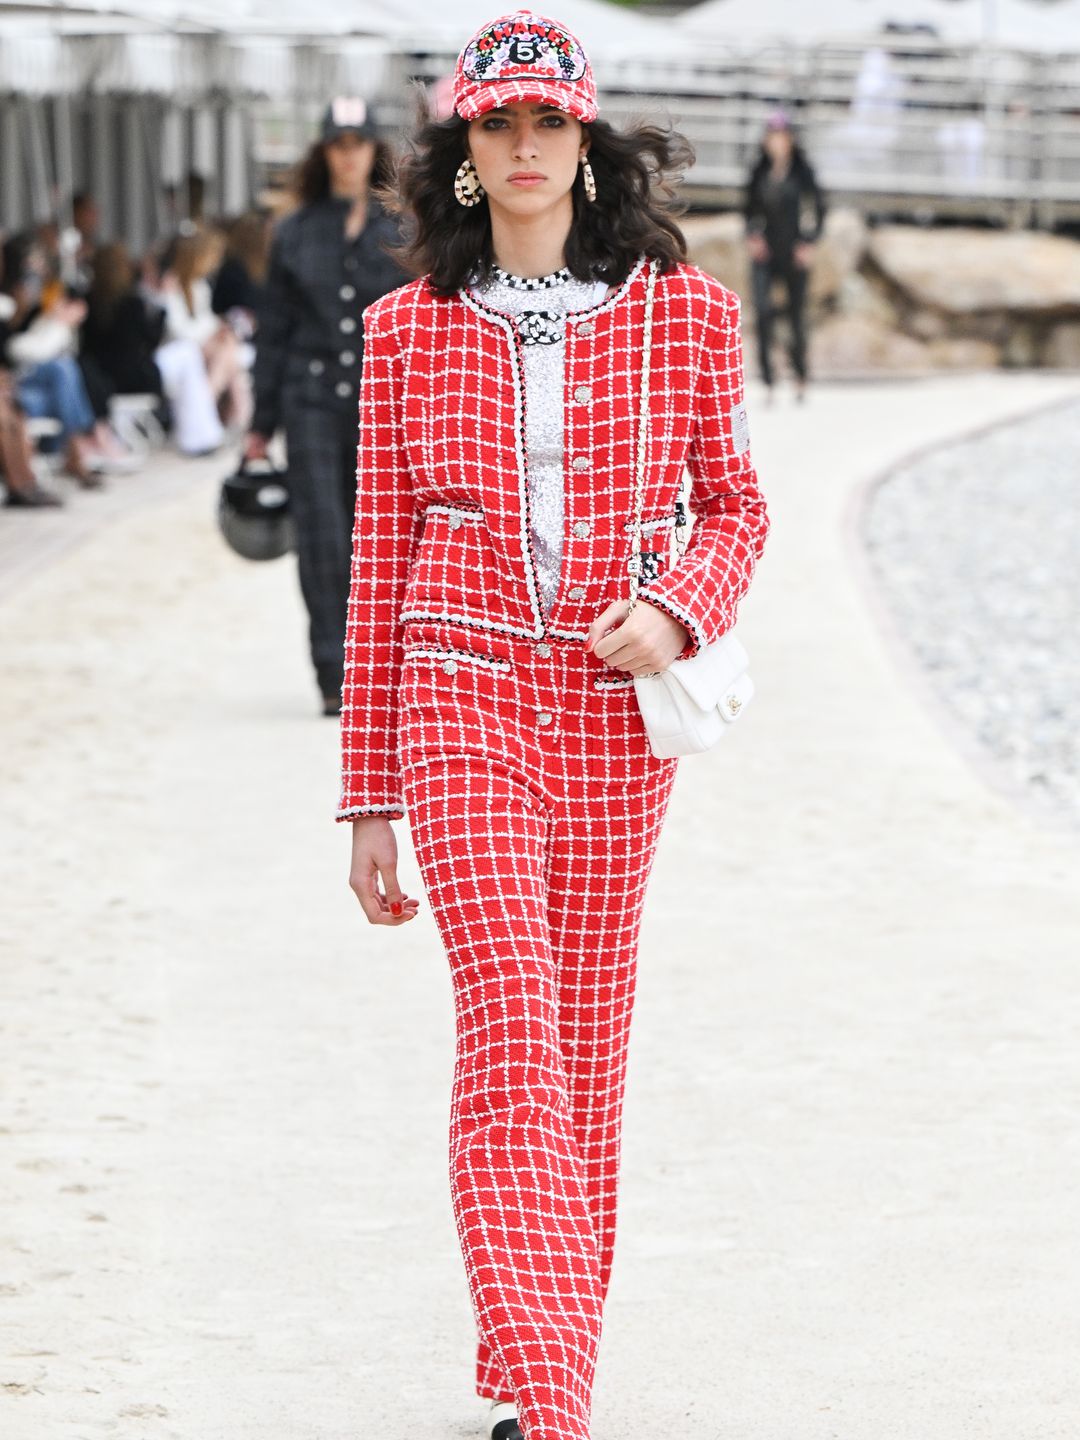 The Grand Prix inspired Chanel's 2023 Cruise Collection